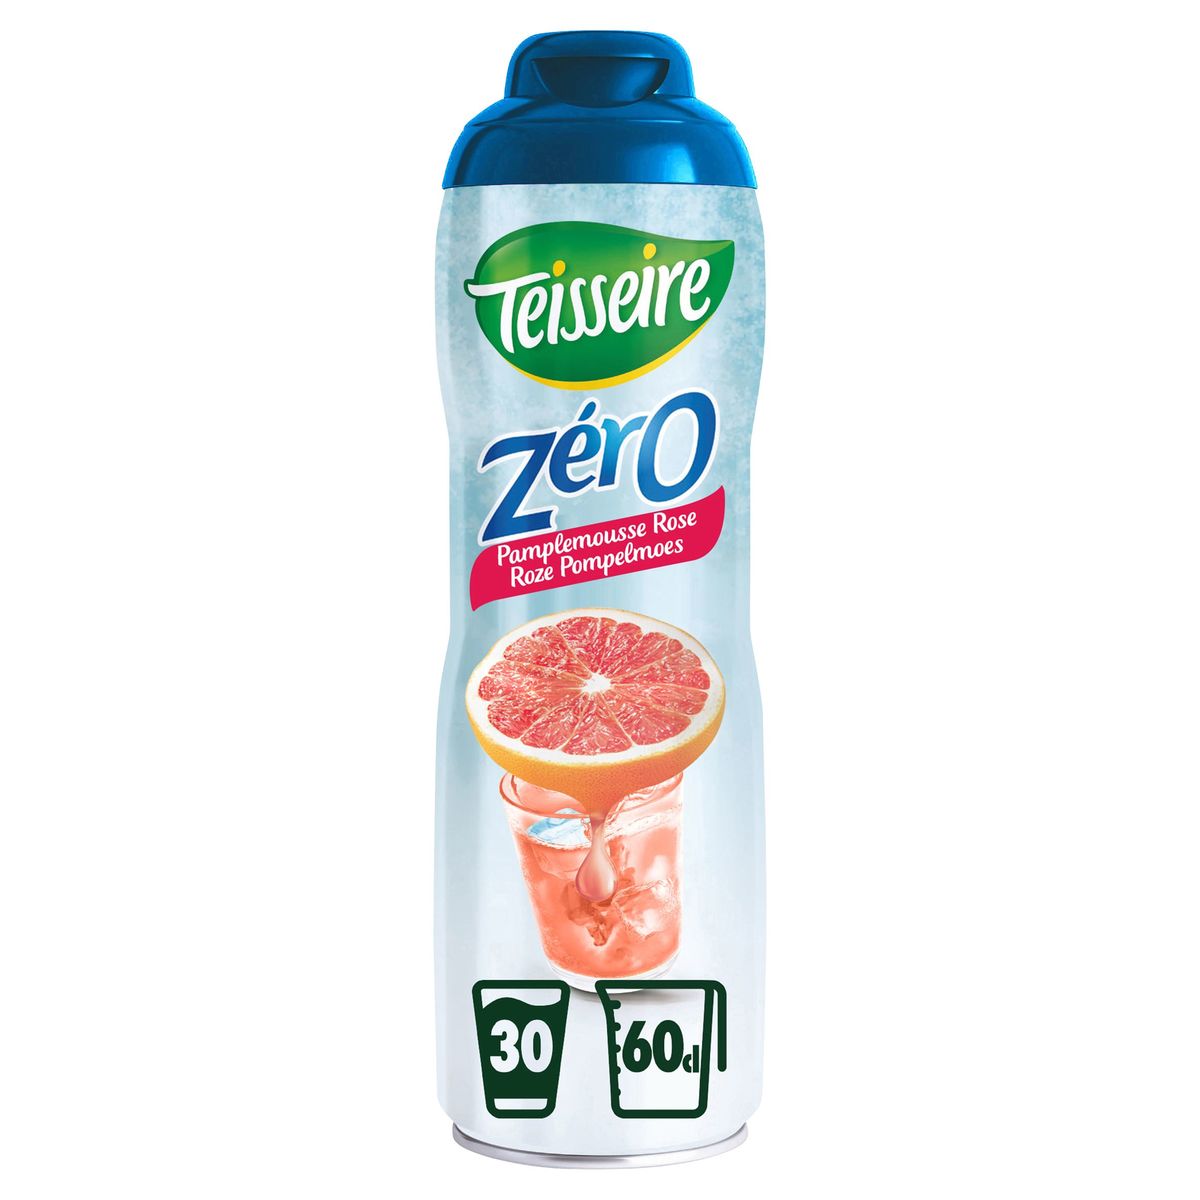 Teisseire Zero Pamplemousse Rose 60 cl